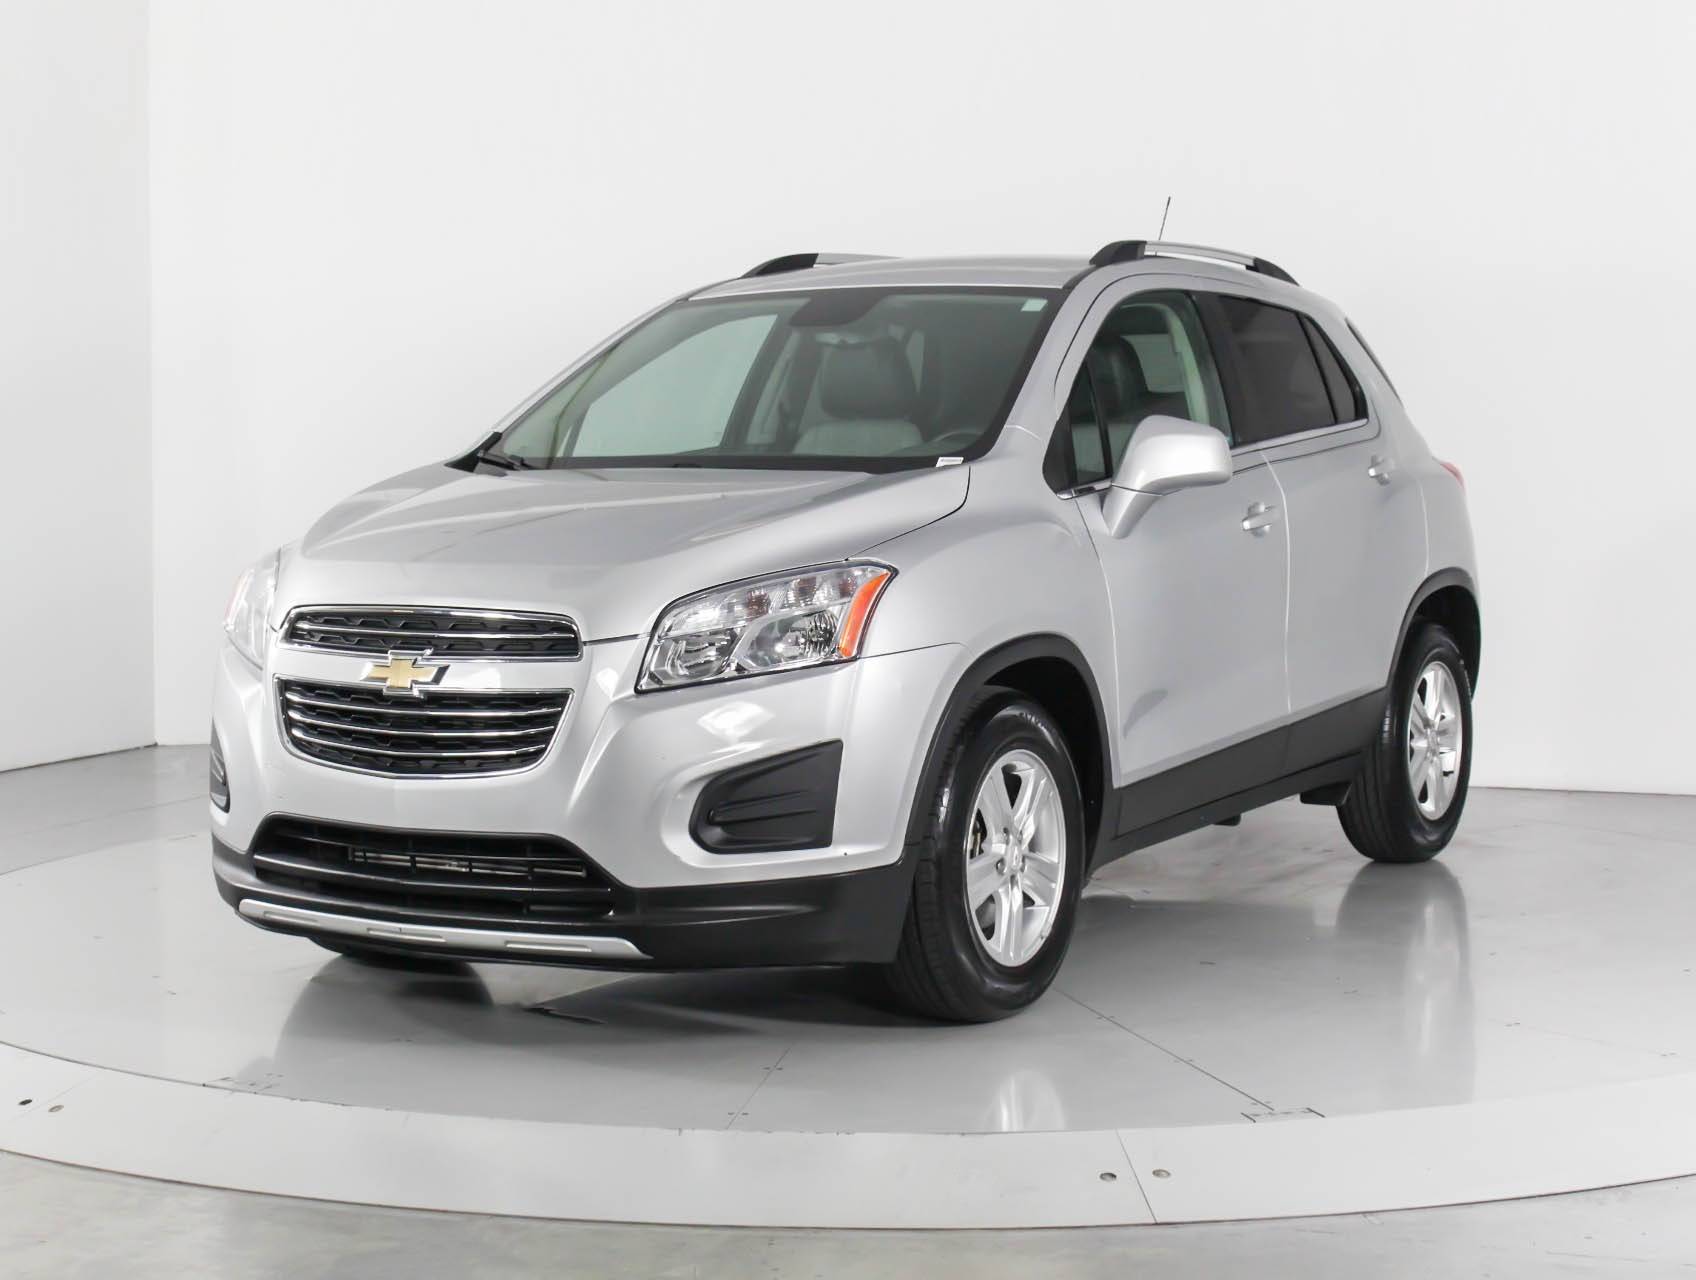 Florida Fine Cars - Used CHEVROLET TRAX 2016 WEST PALM 1LT